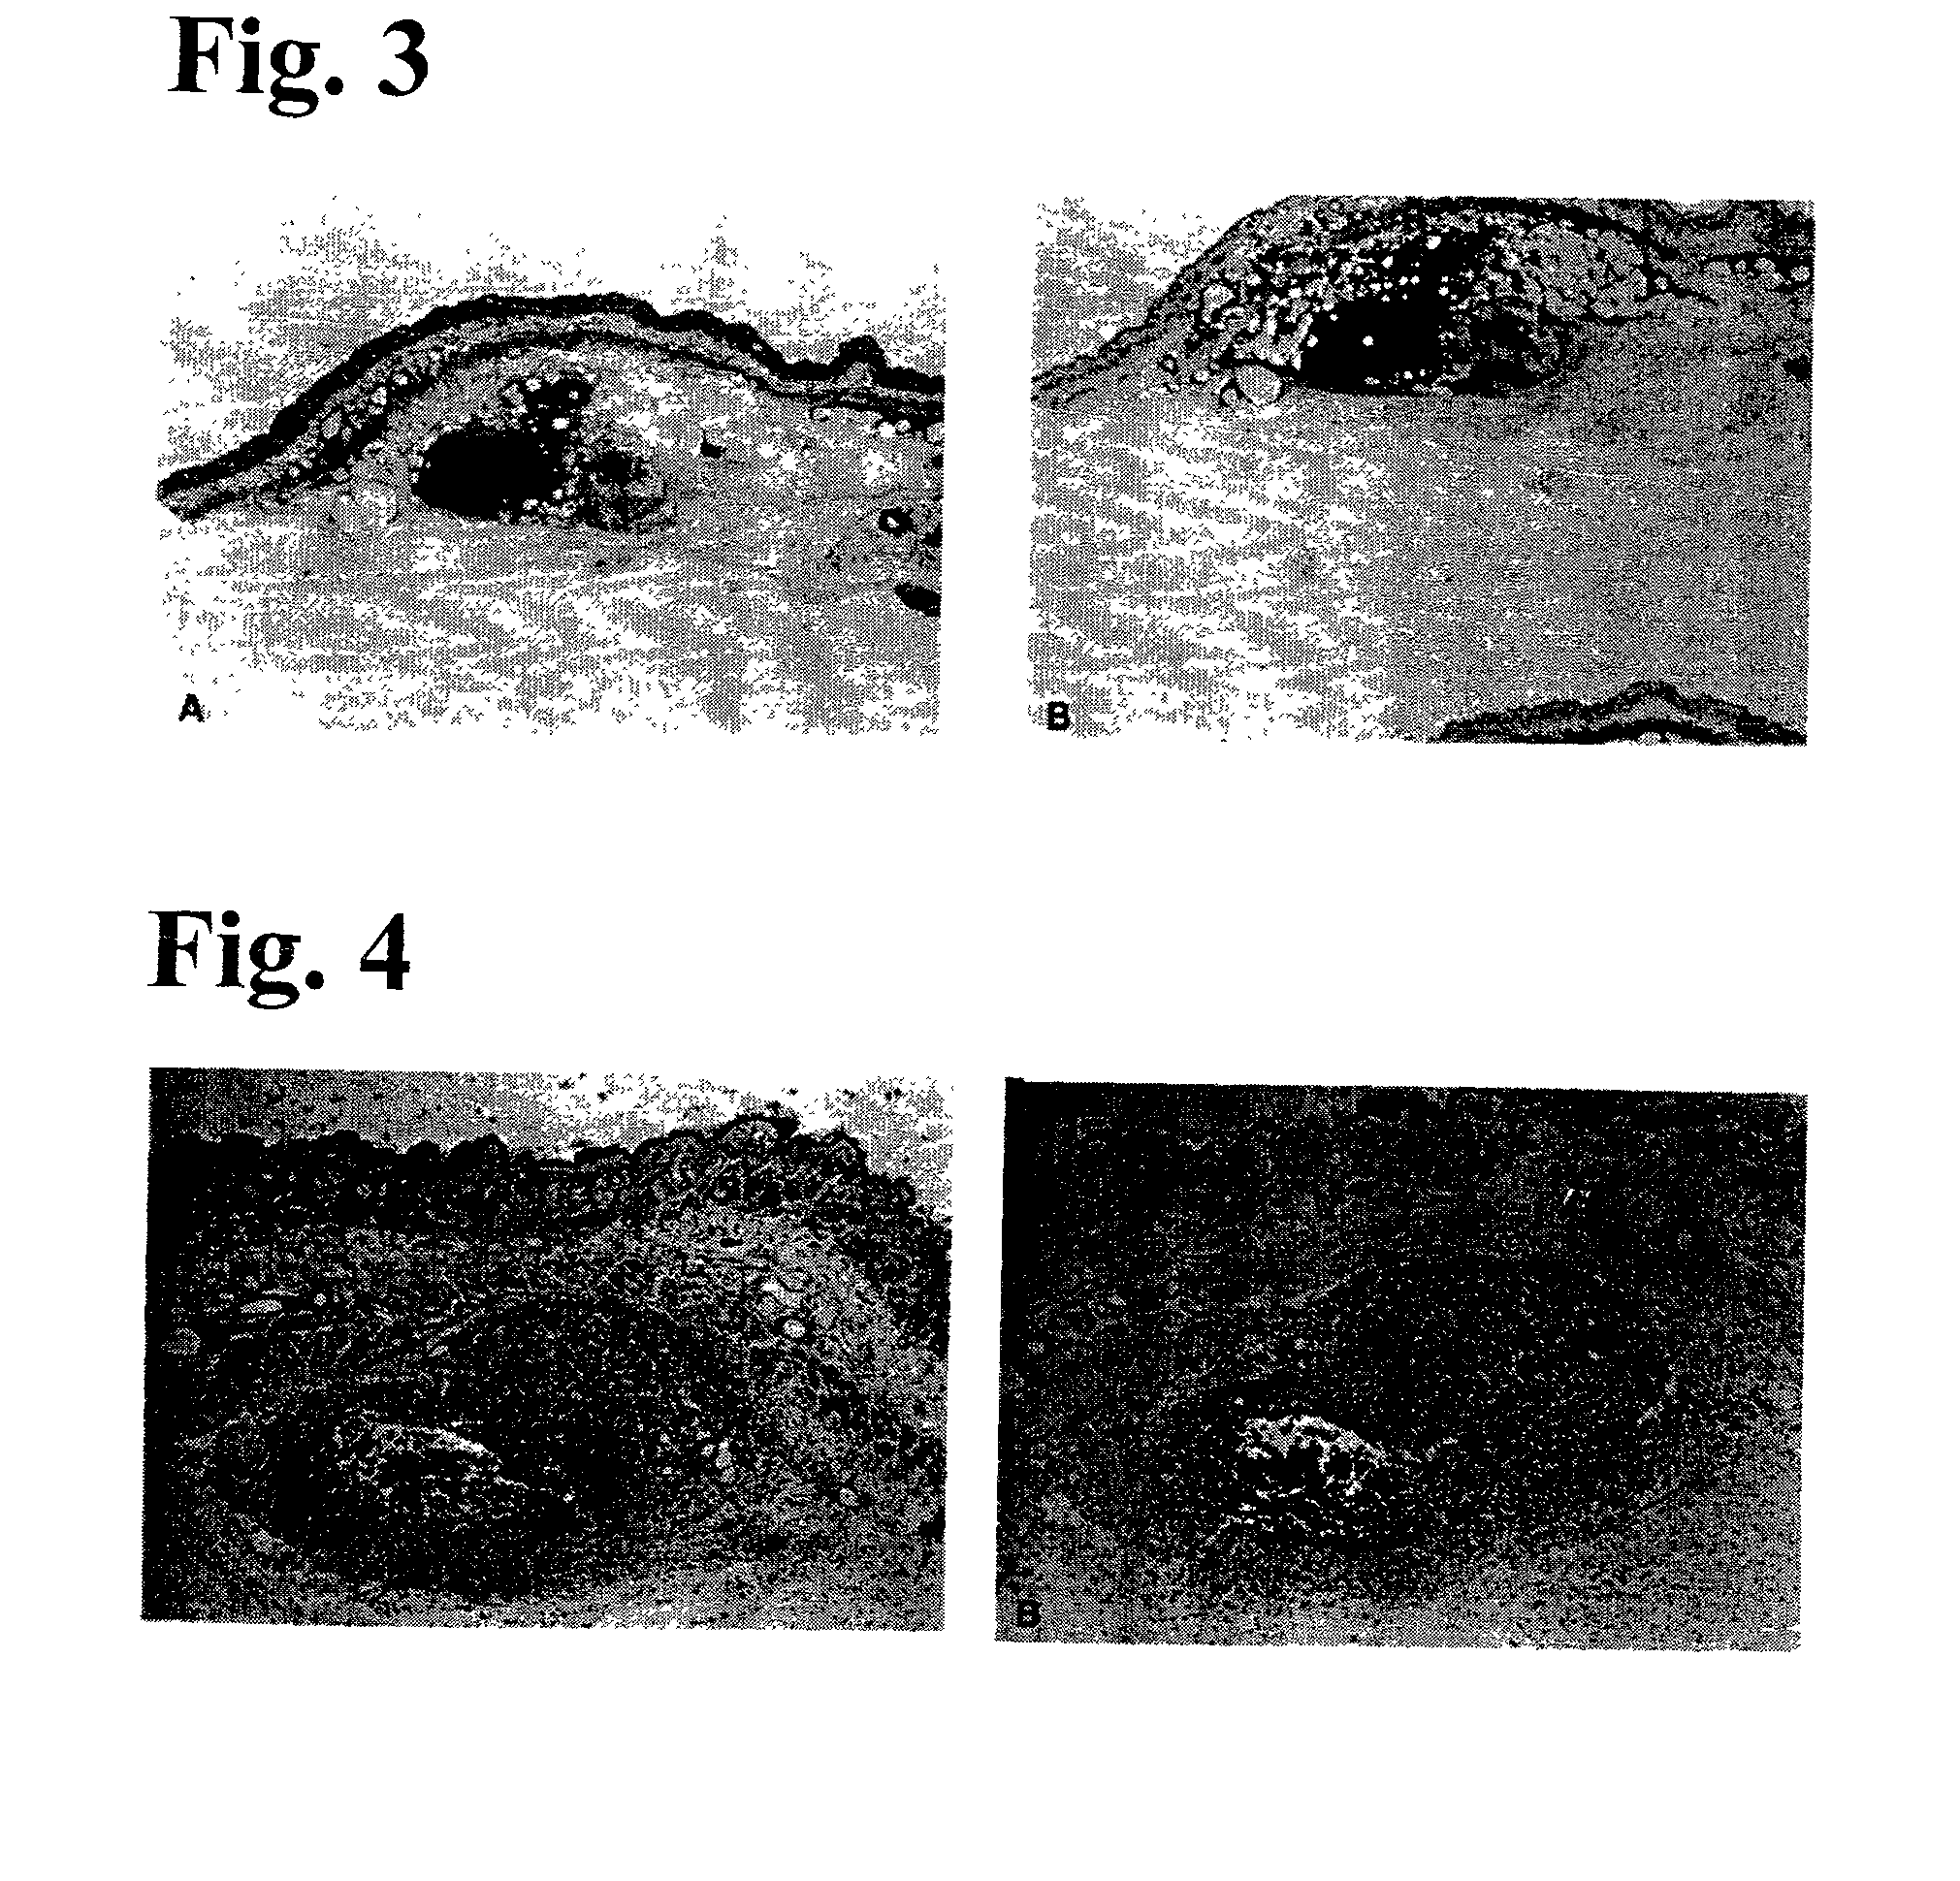 Method of manufacture of garlic extract for use as a preventive and therapeutic agent for human prostate and bladder cancers